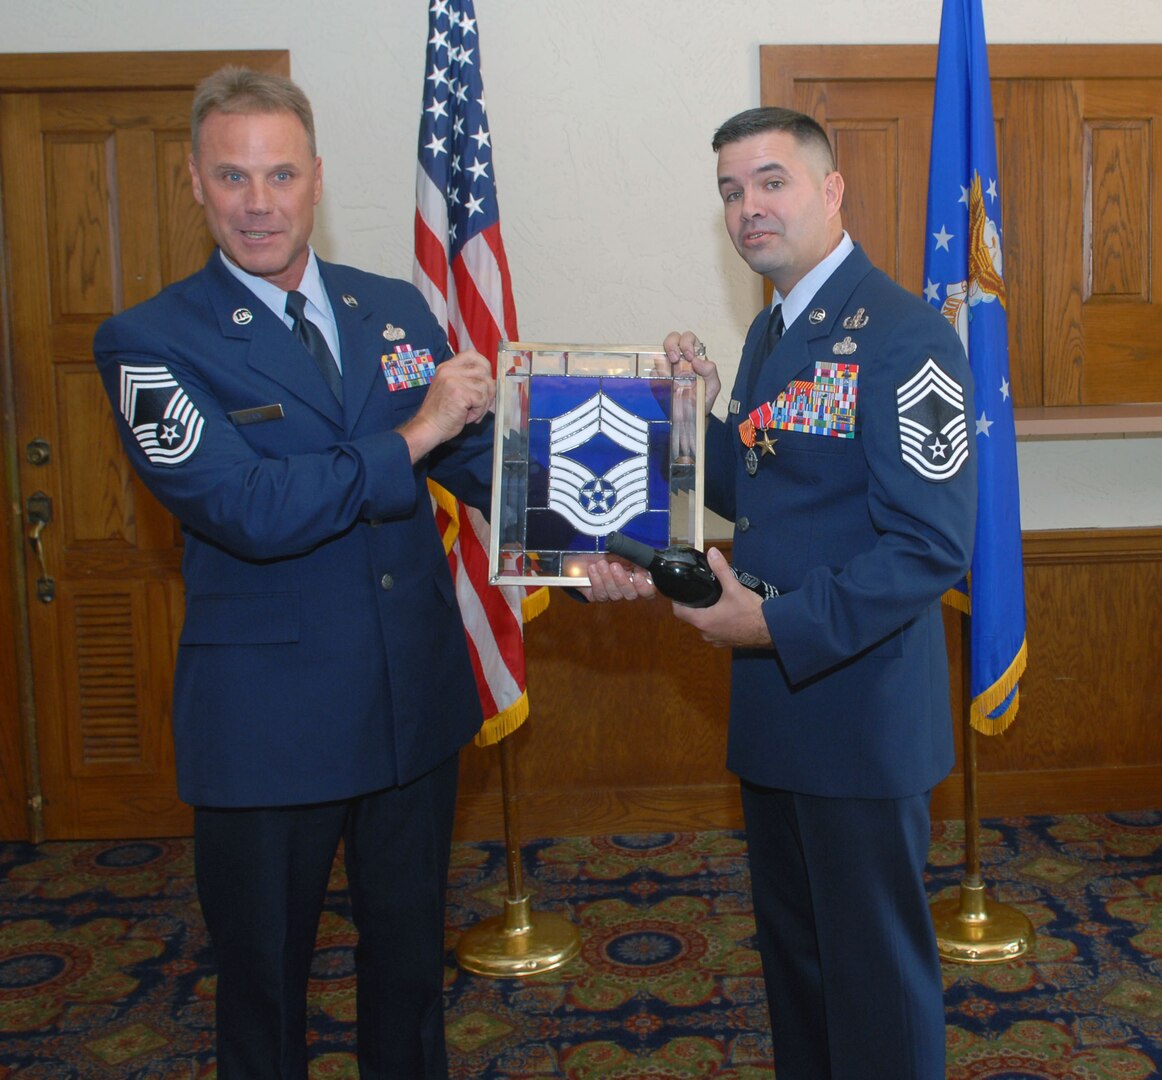 Chief Master Sgt. Joseph May Jr. (right), Air Education and Training Command's explosive ordnance disposal functional manager, accepts a stained glass chief master sergeant symbol from Chief Master Sgt. David Fain during a ceremony Aug. 1. During the ceremony, Chief May received a triple crown -- he was officially promoted to chief master sergeant and awarded his first Combat Action Medal and second Bronze Star. The stained glass, a gift from the Randolph Chief's Group, is traditionally presented to new chiefs. (U.S. Air Force photo by Rich McFadden)